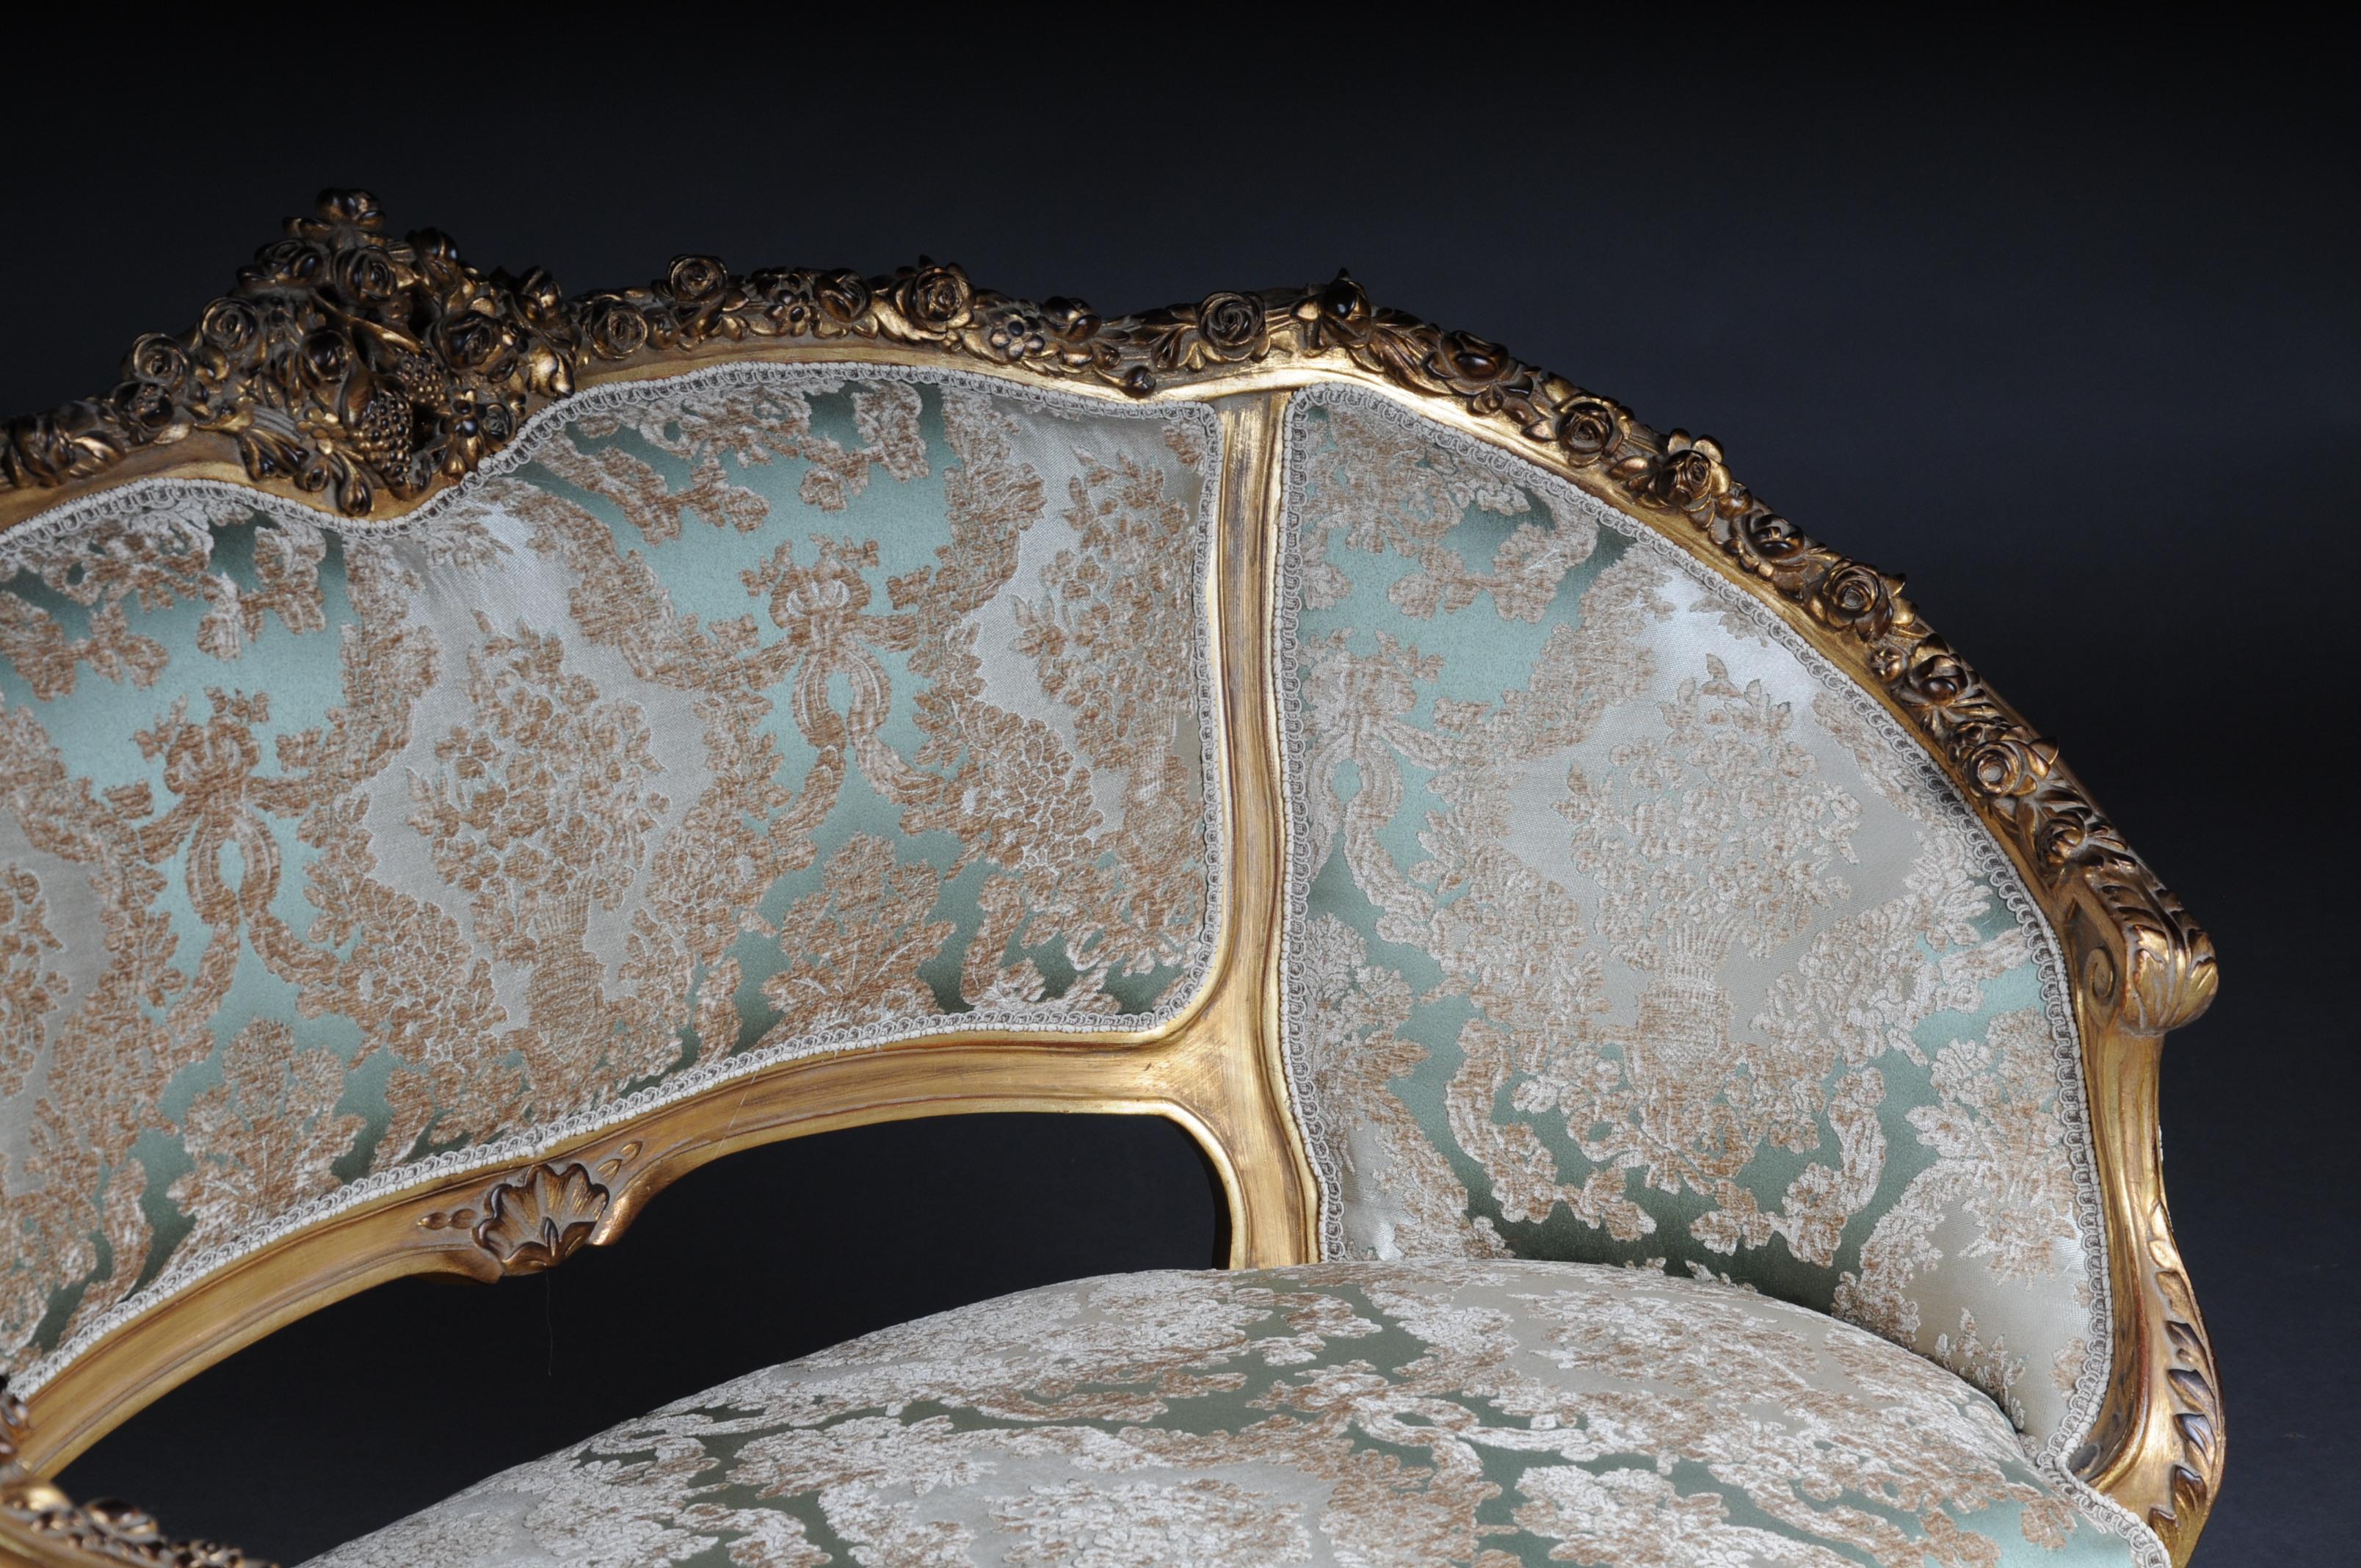 Elegant Sofa, Canapé, Couch in Rococo or Louis XV Style 1